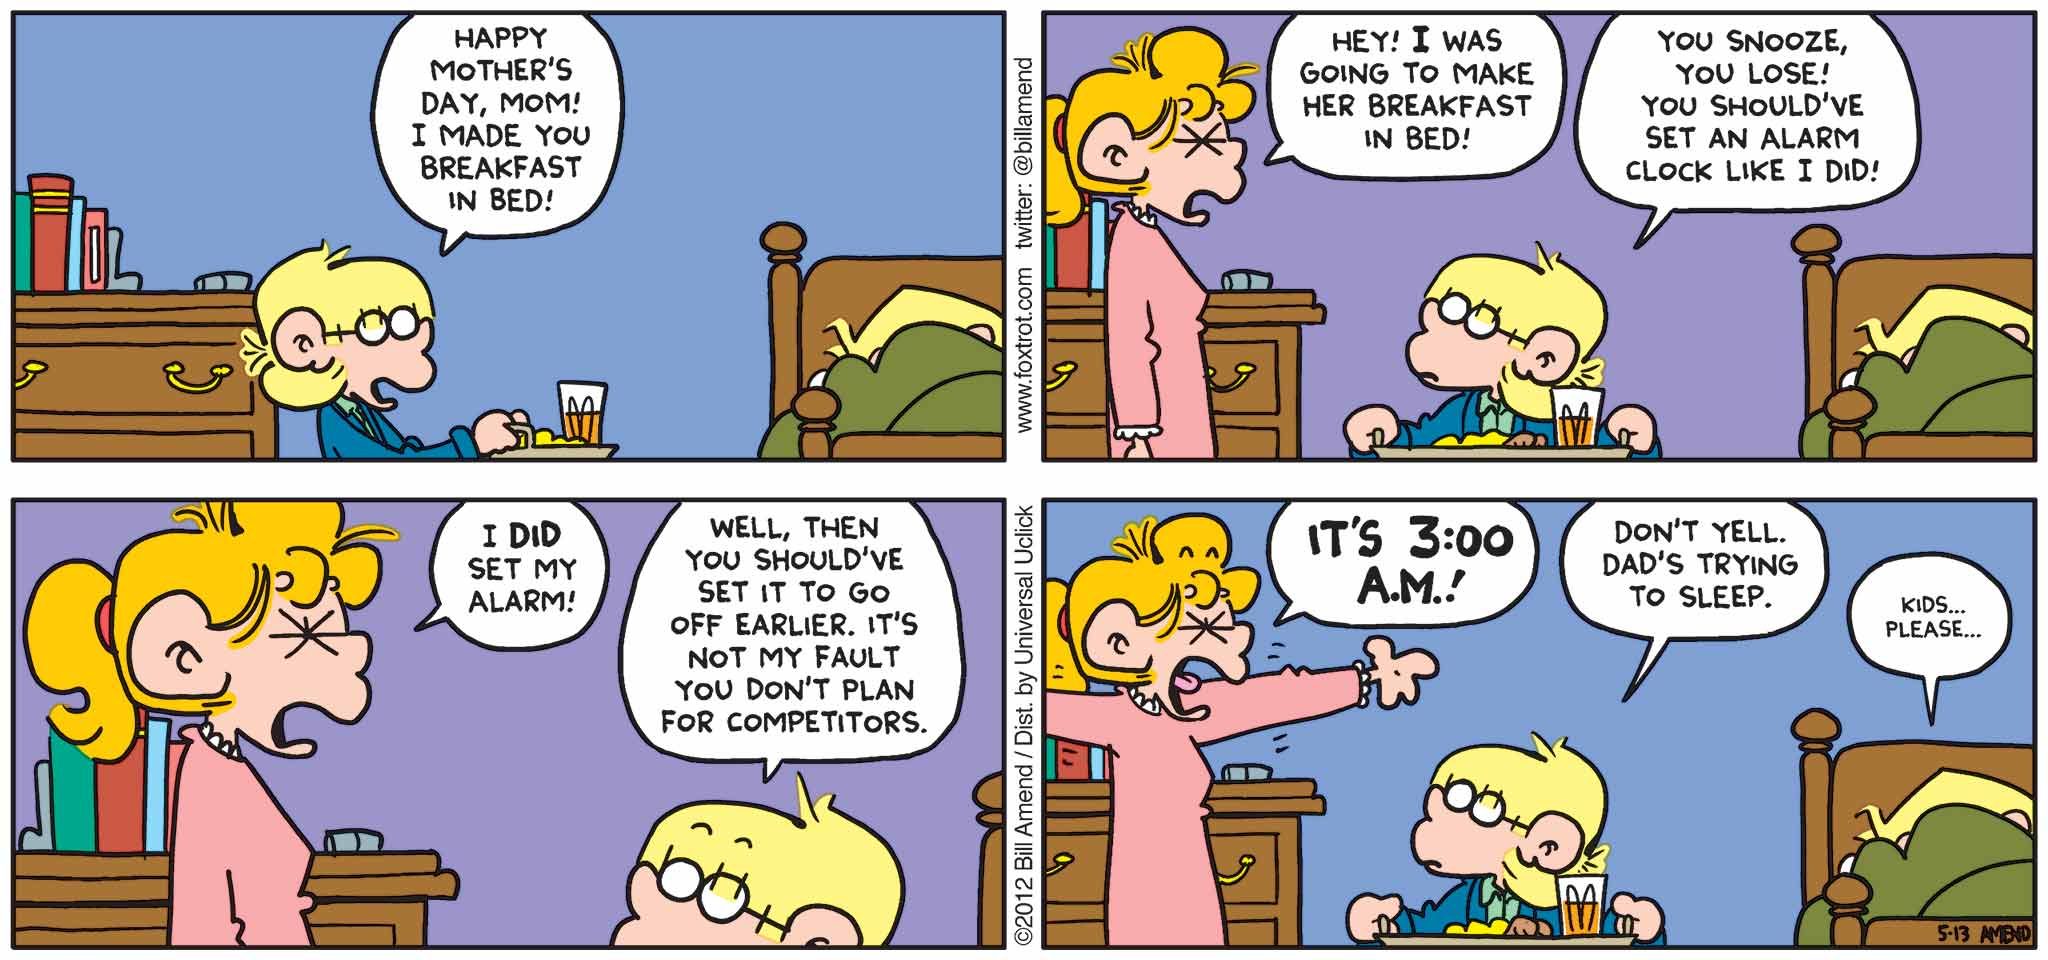 FoxTrot by Bill Amend - Mother's Day comic published May 13, 2012 - Jason: Happy Mother's Day, mom! I made you breakfast in bed! Paige: Hey, I was going to make her breakfast in bed! Jason: You snooze, you lose! You should've set an alarm clock like I did. Paige: I did set my alarm! Jason: Well, then you should've set it to go off earlier. It's not my fault you don't plan for competitors. Paige: It's 3:00 AM! Jason: Don't yell. Dad's trying to sleep. Andy: Kids... please...